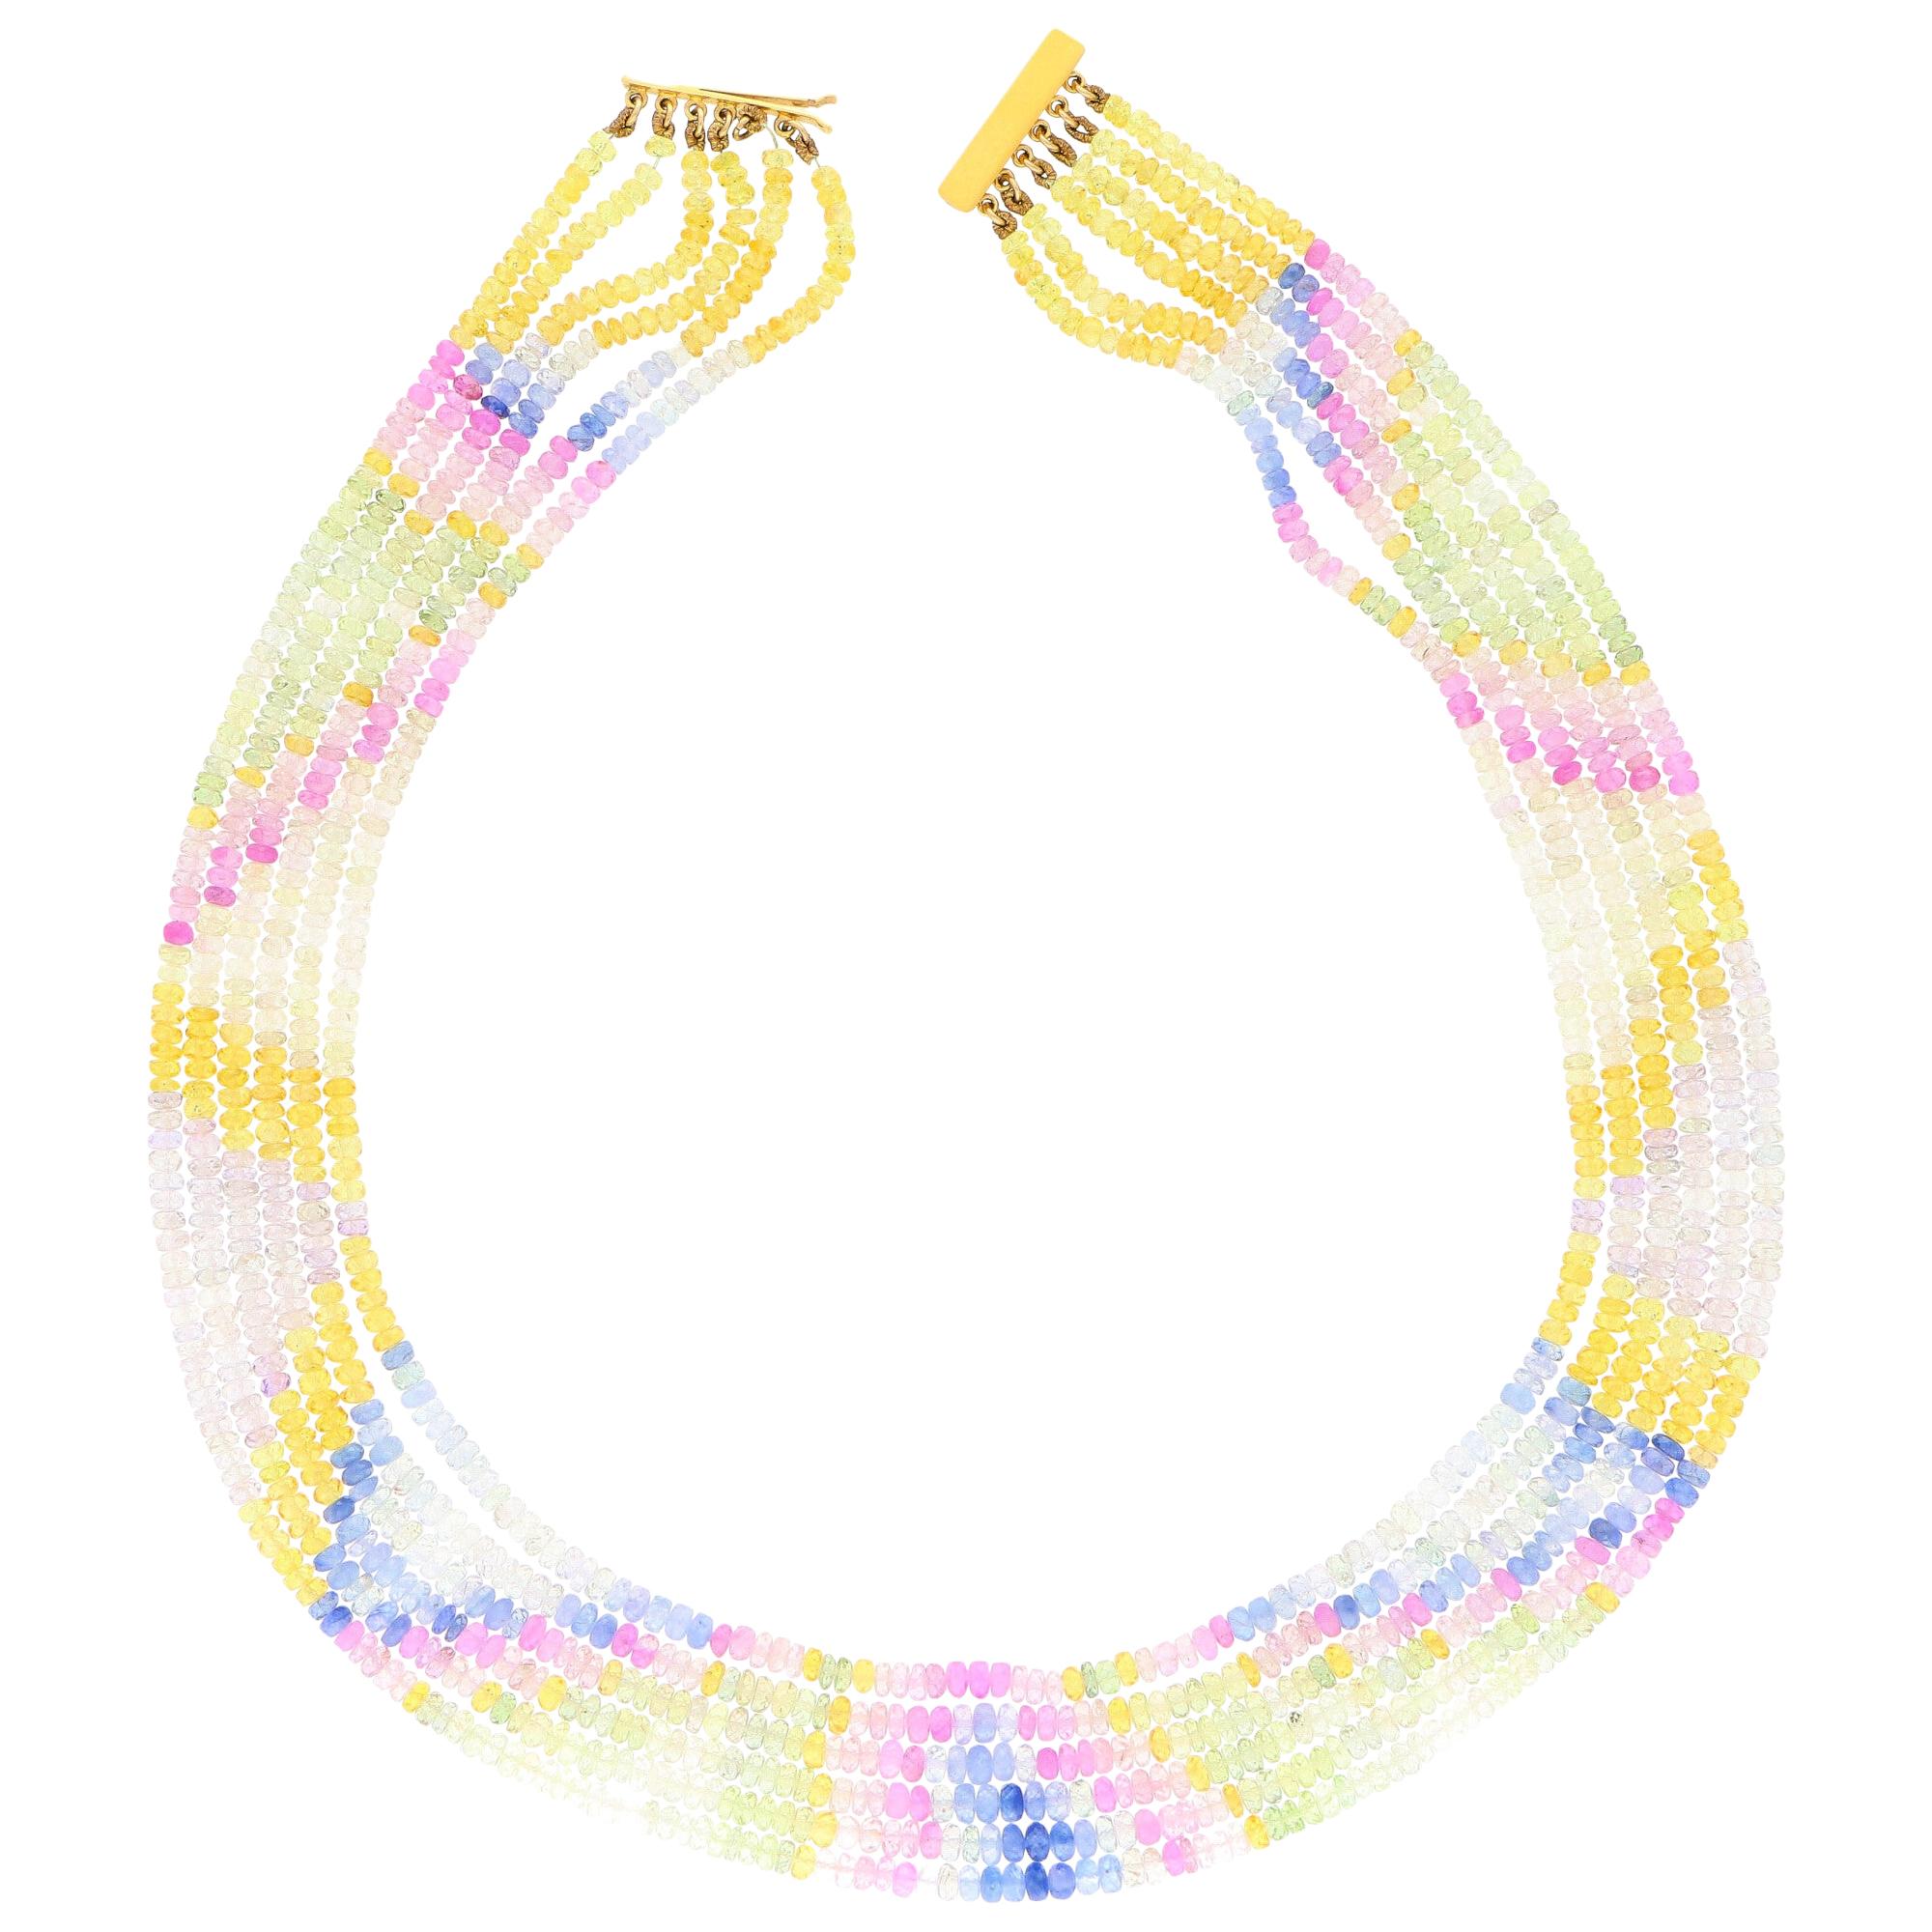 Beaded Pastel Rainbow Sapphire Strand Necklace with 9 Karat Gold Clasp